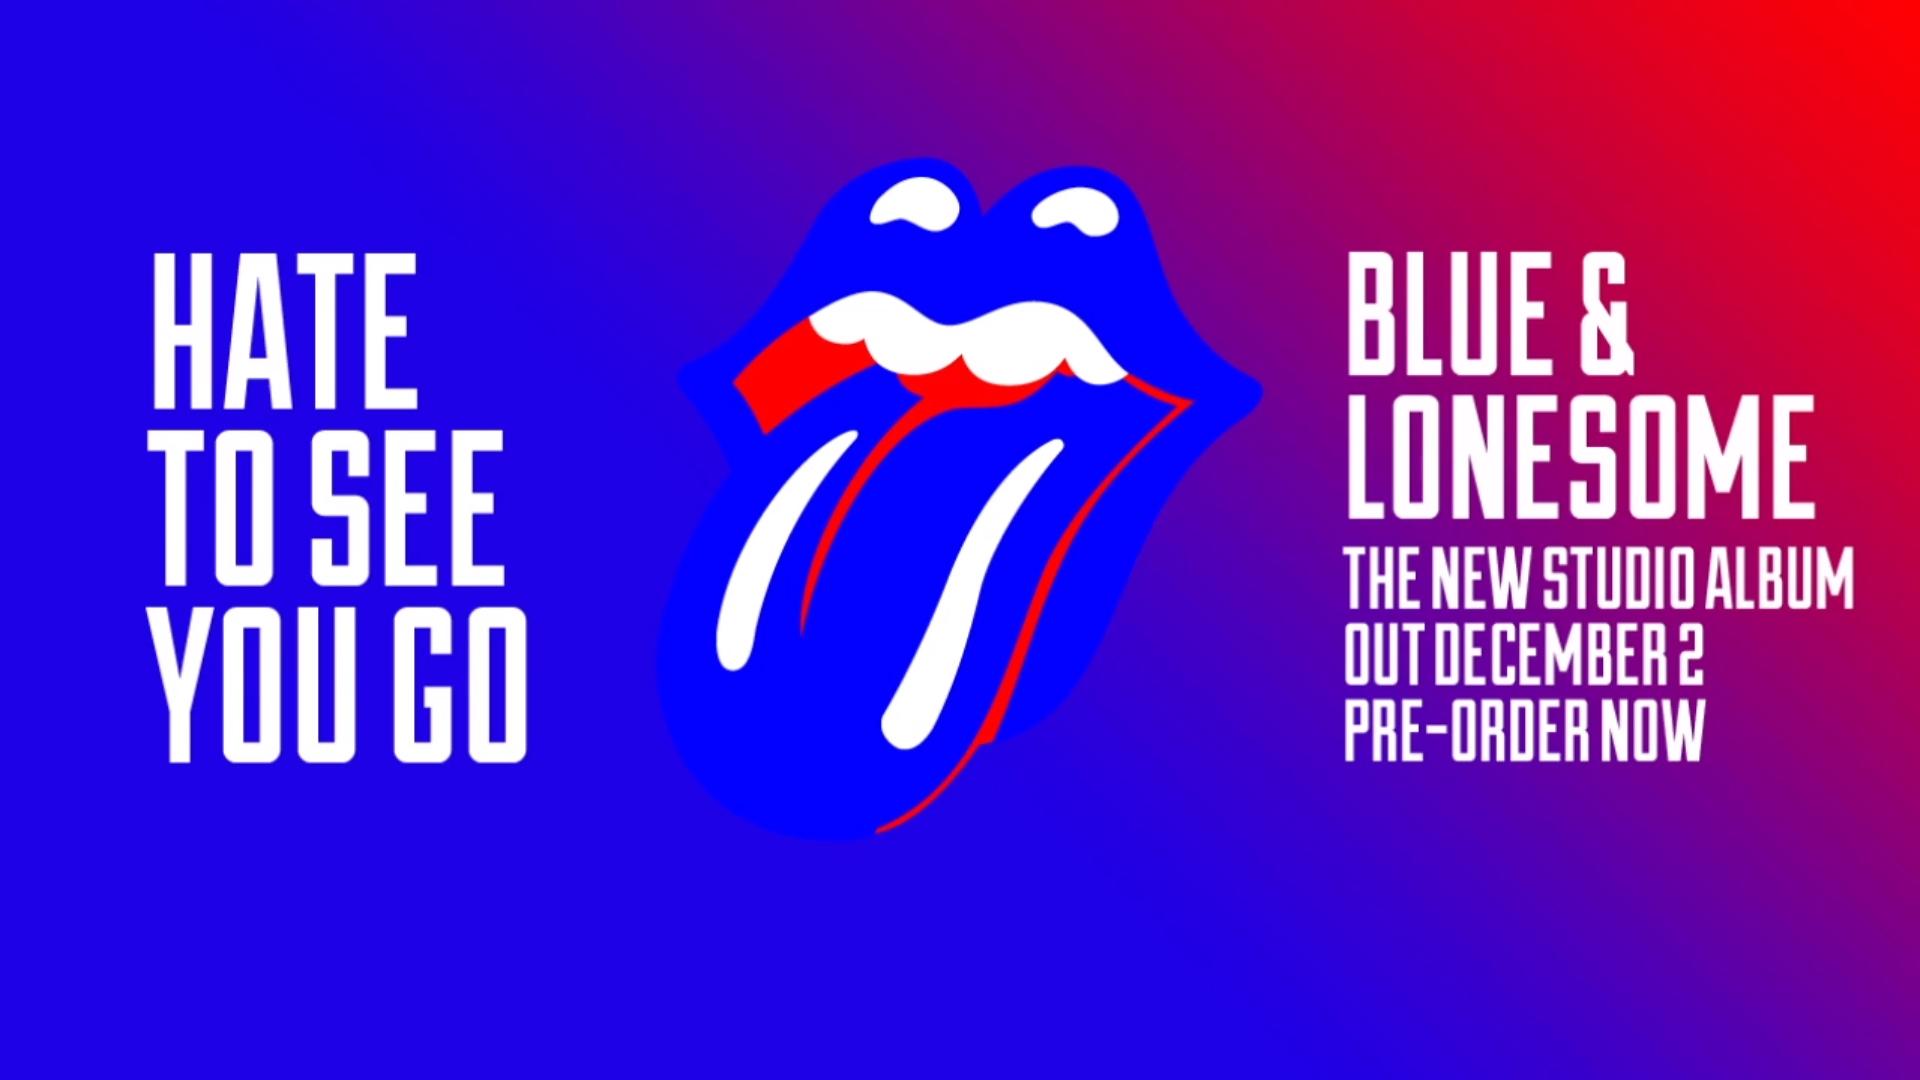 The Rolling Stones Share New Single 'Hate To See You Go'